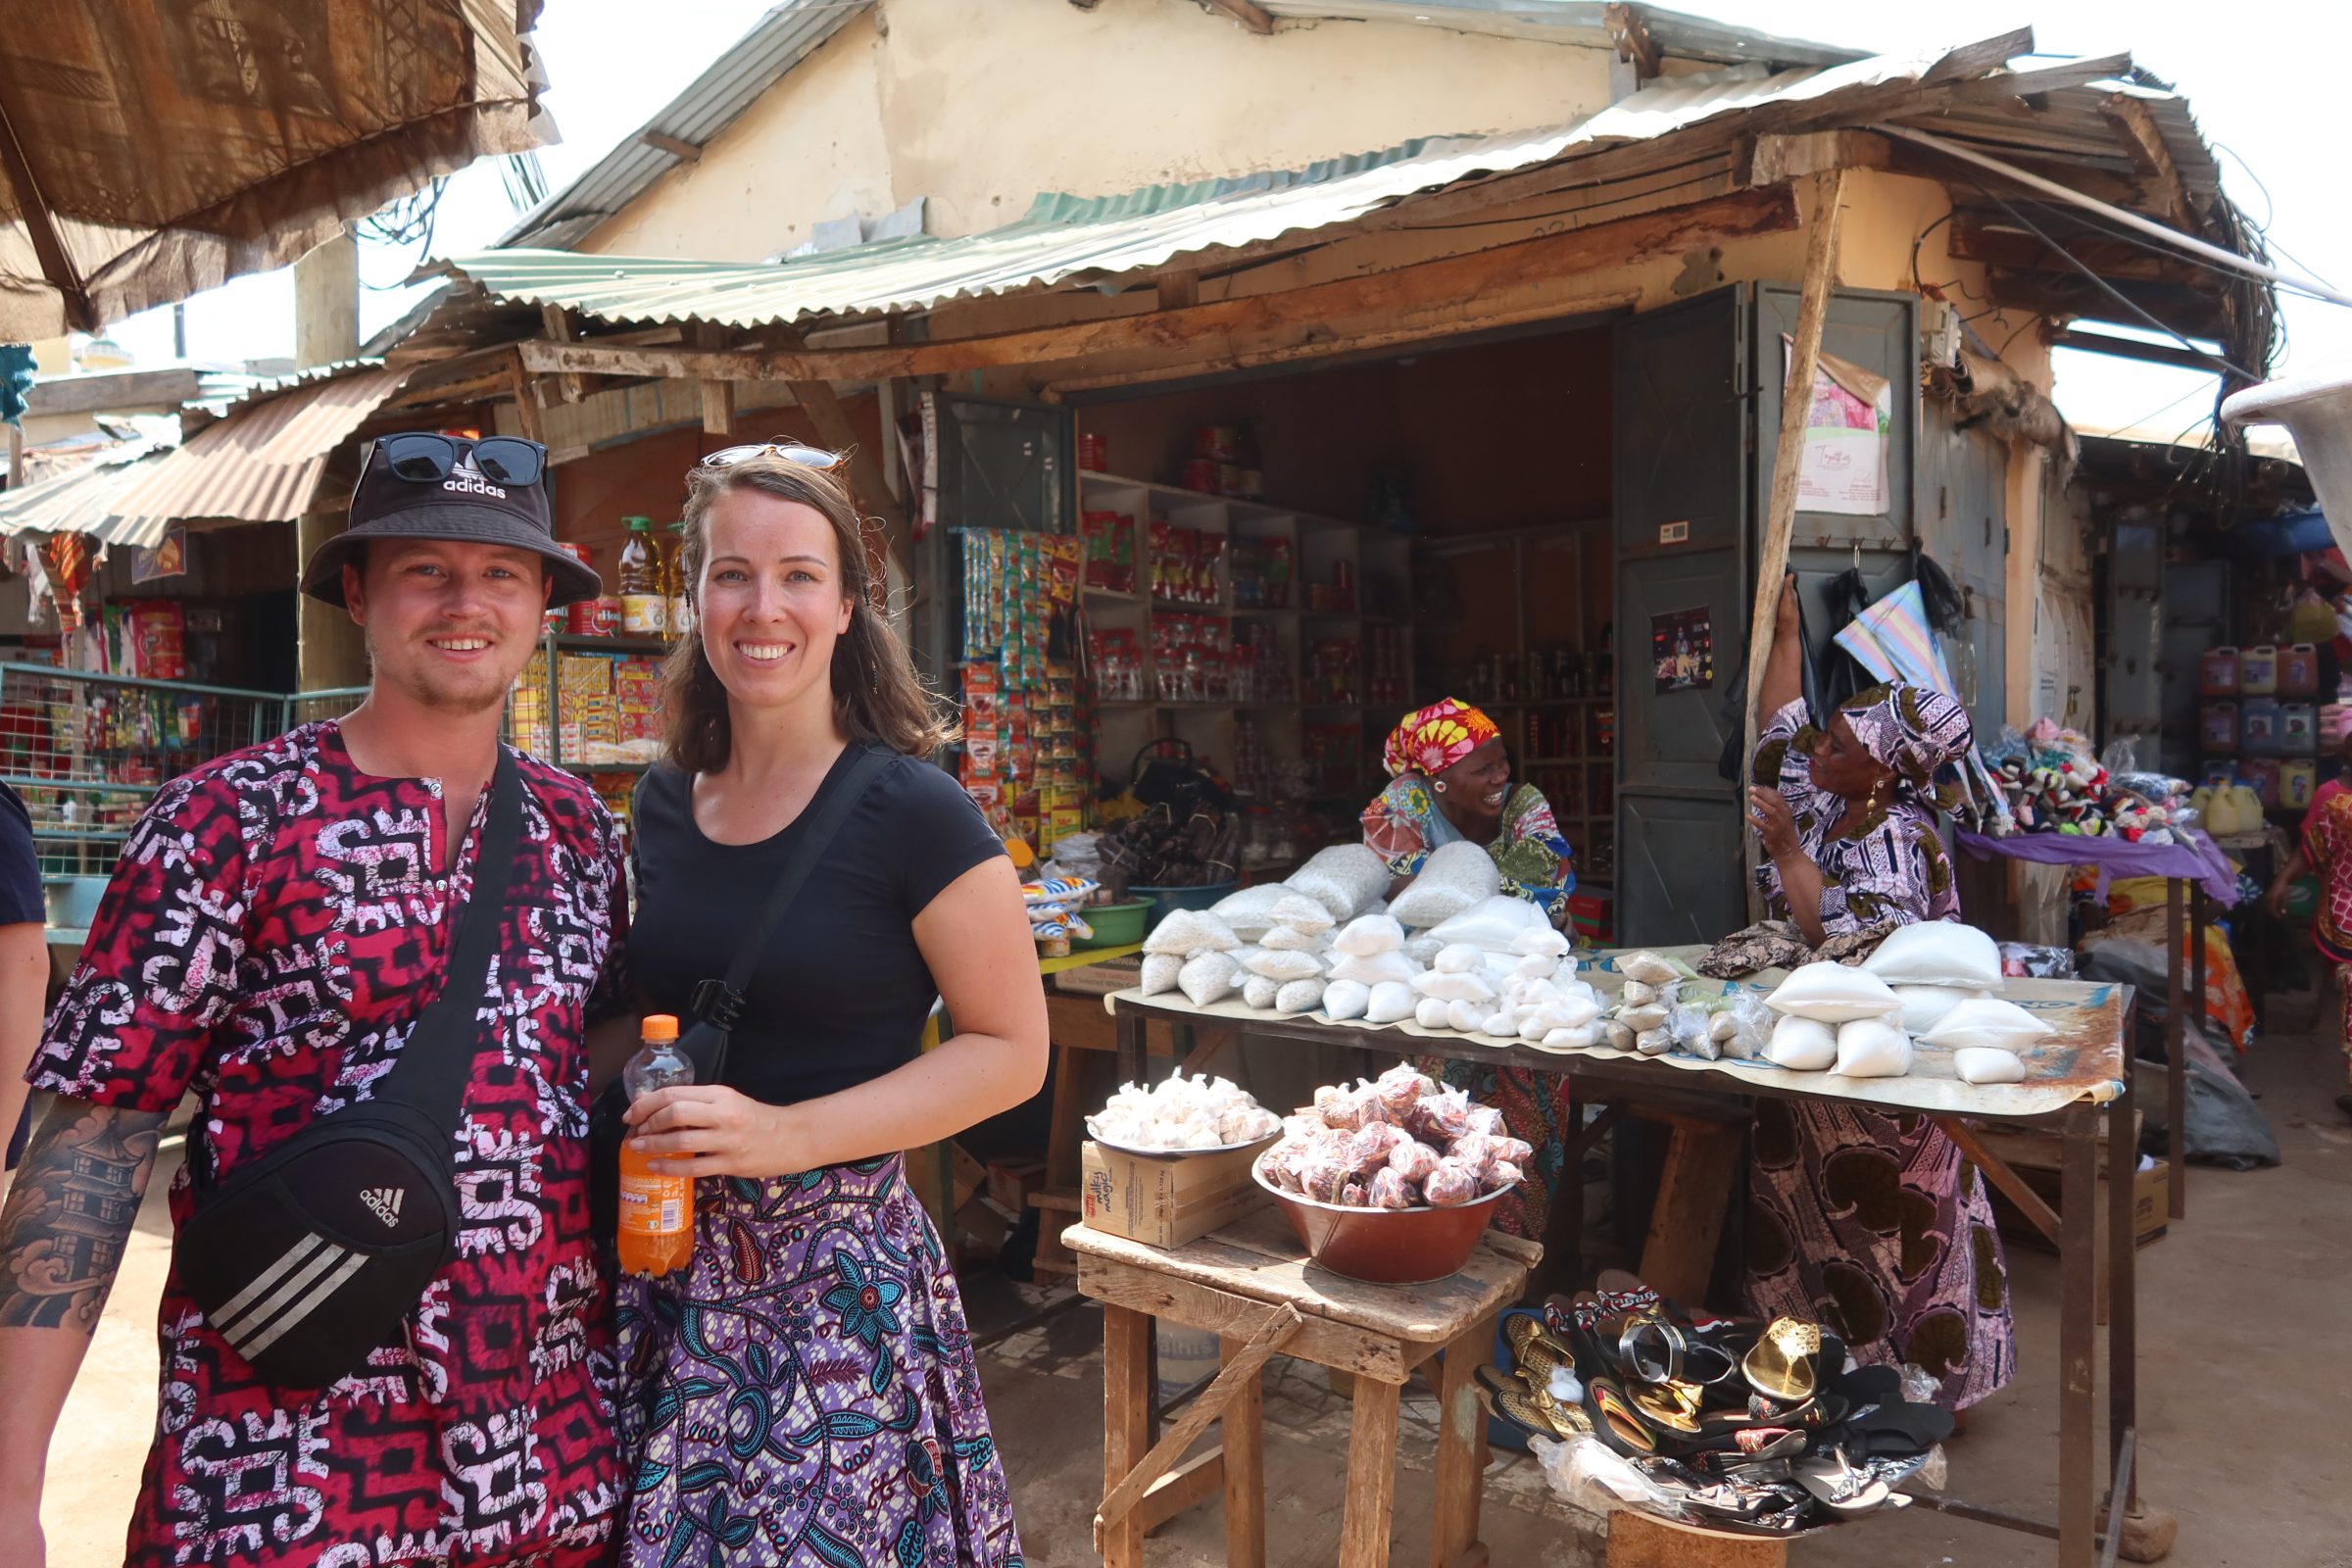 Shopping at the market in Tamale, Ghana.